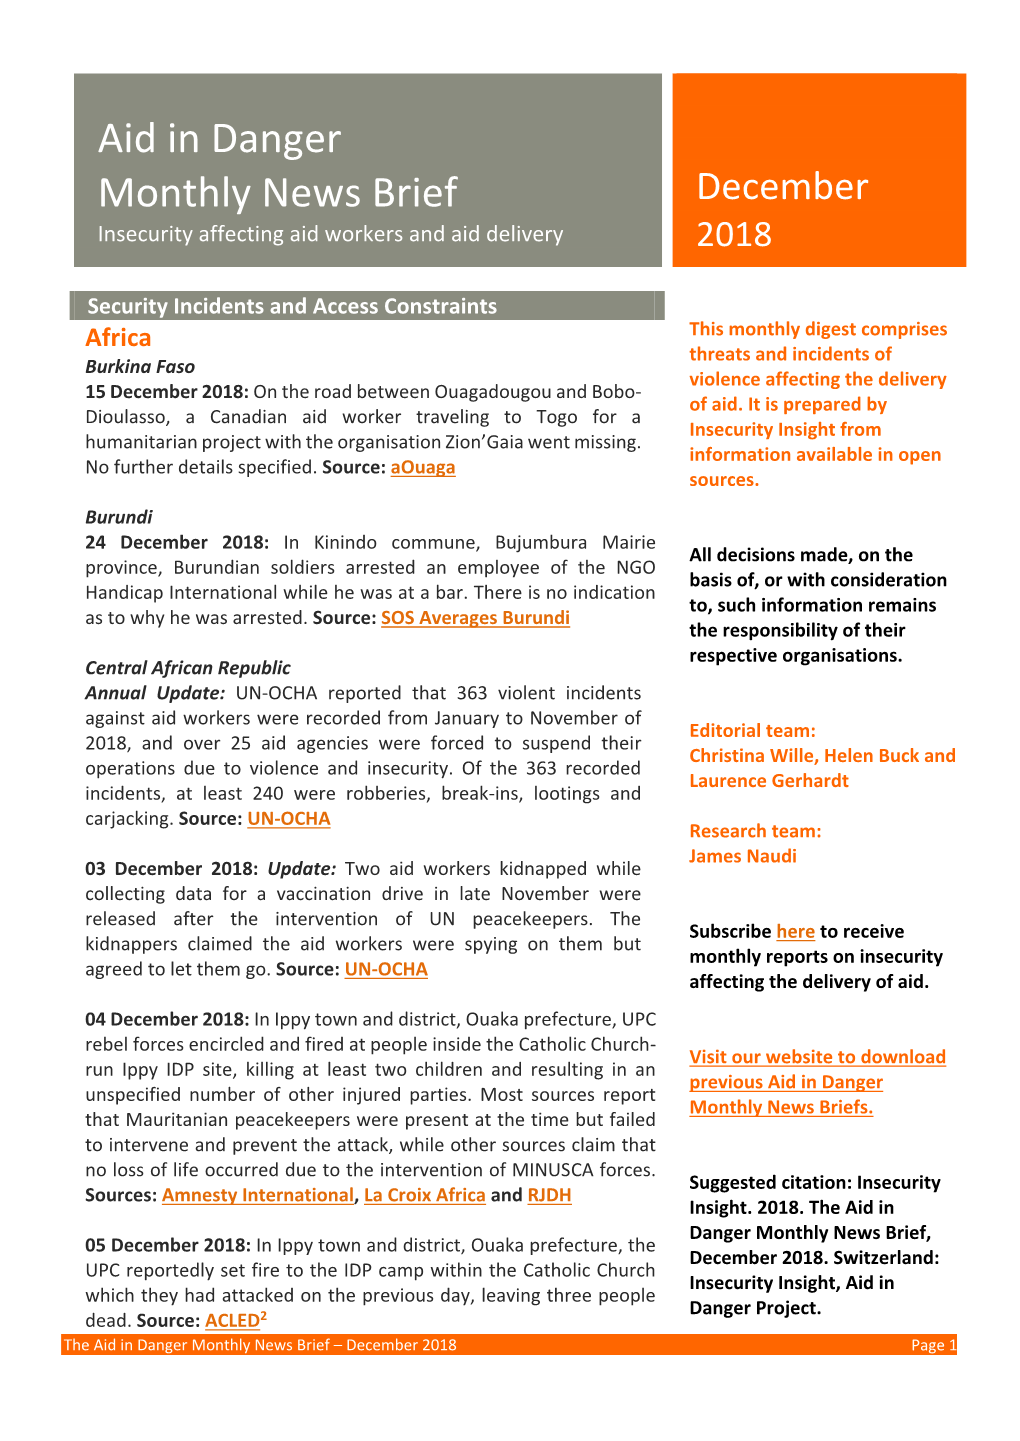 Aid in Danger Monthly News Brief December Insecurity Affecting Aid Workers and Aid Delivery 2018